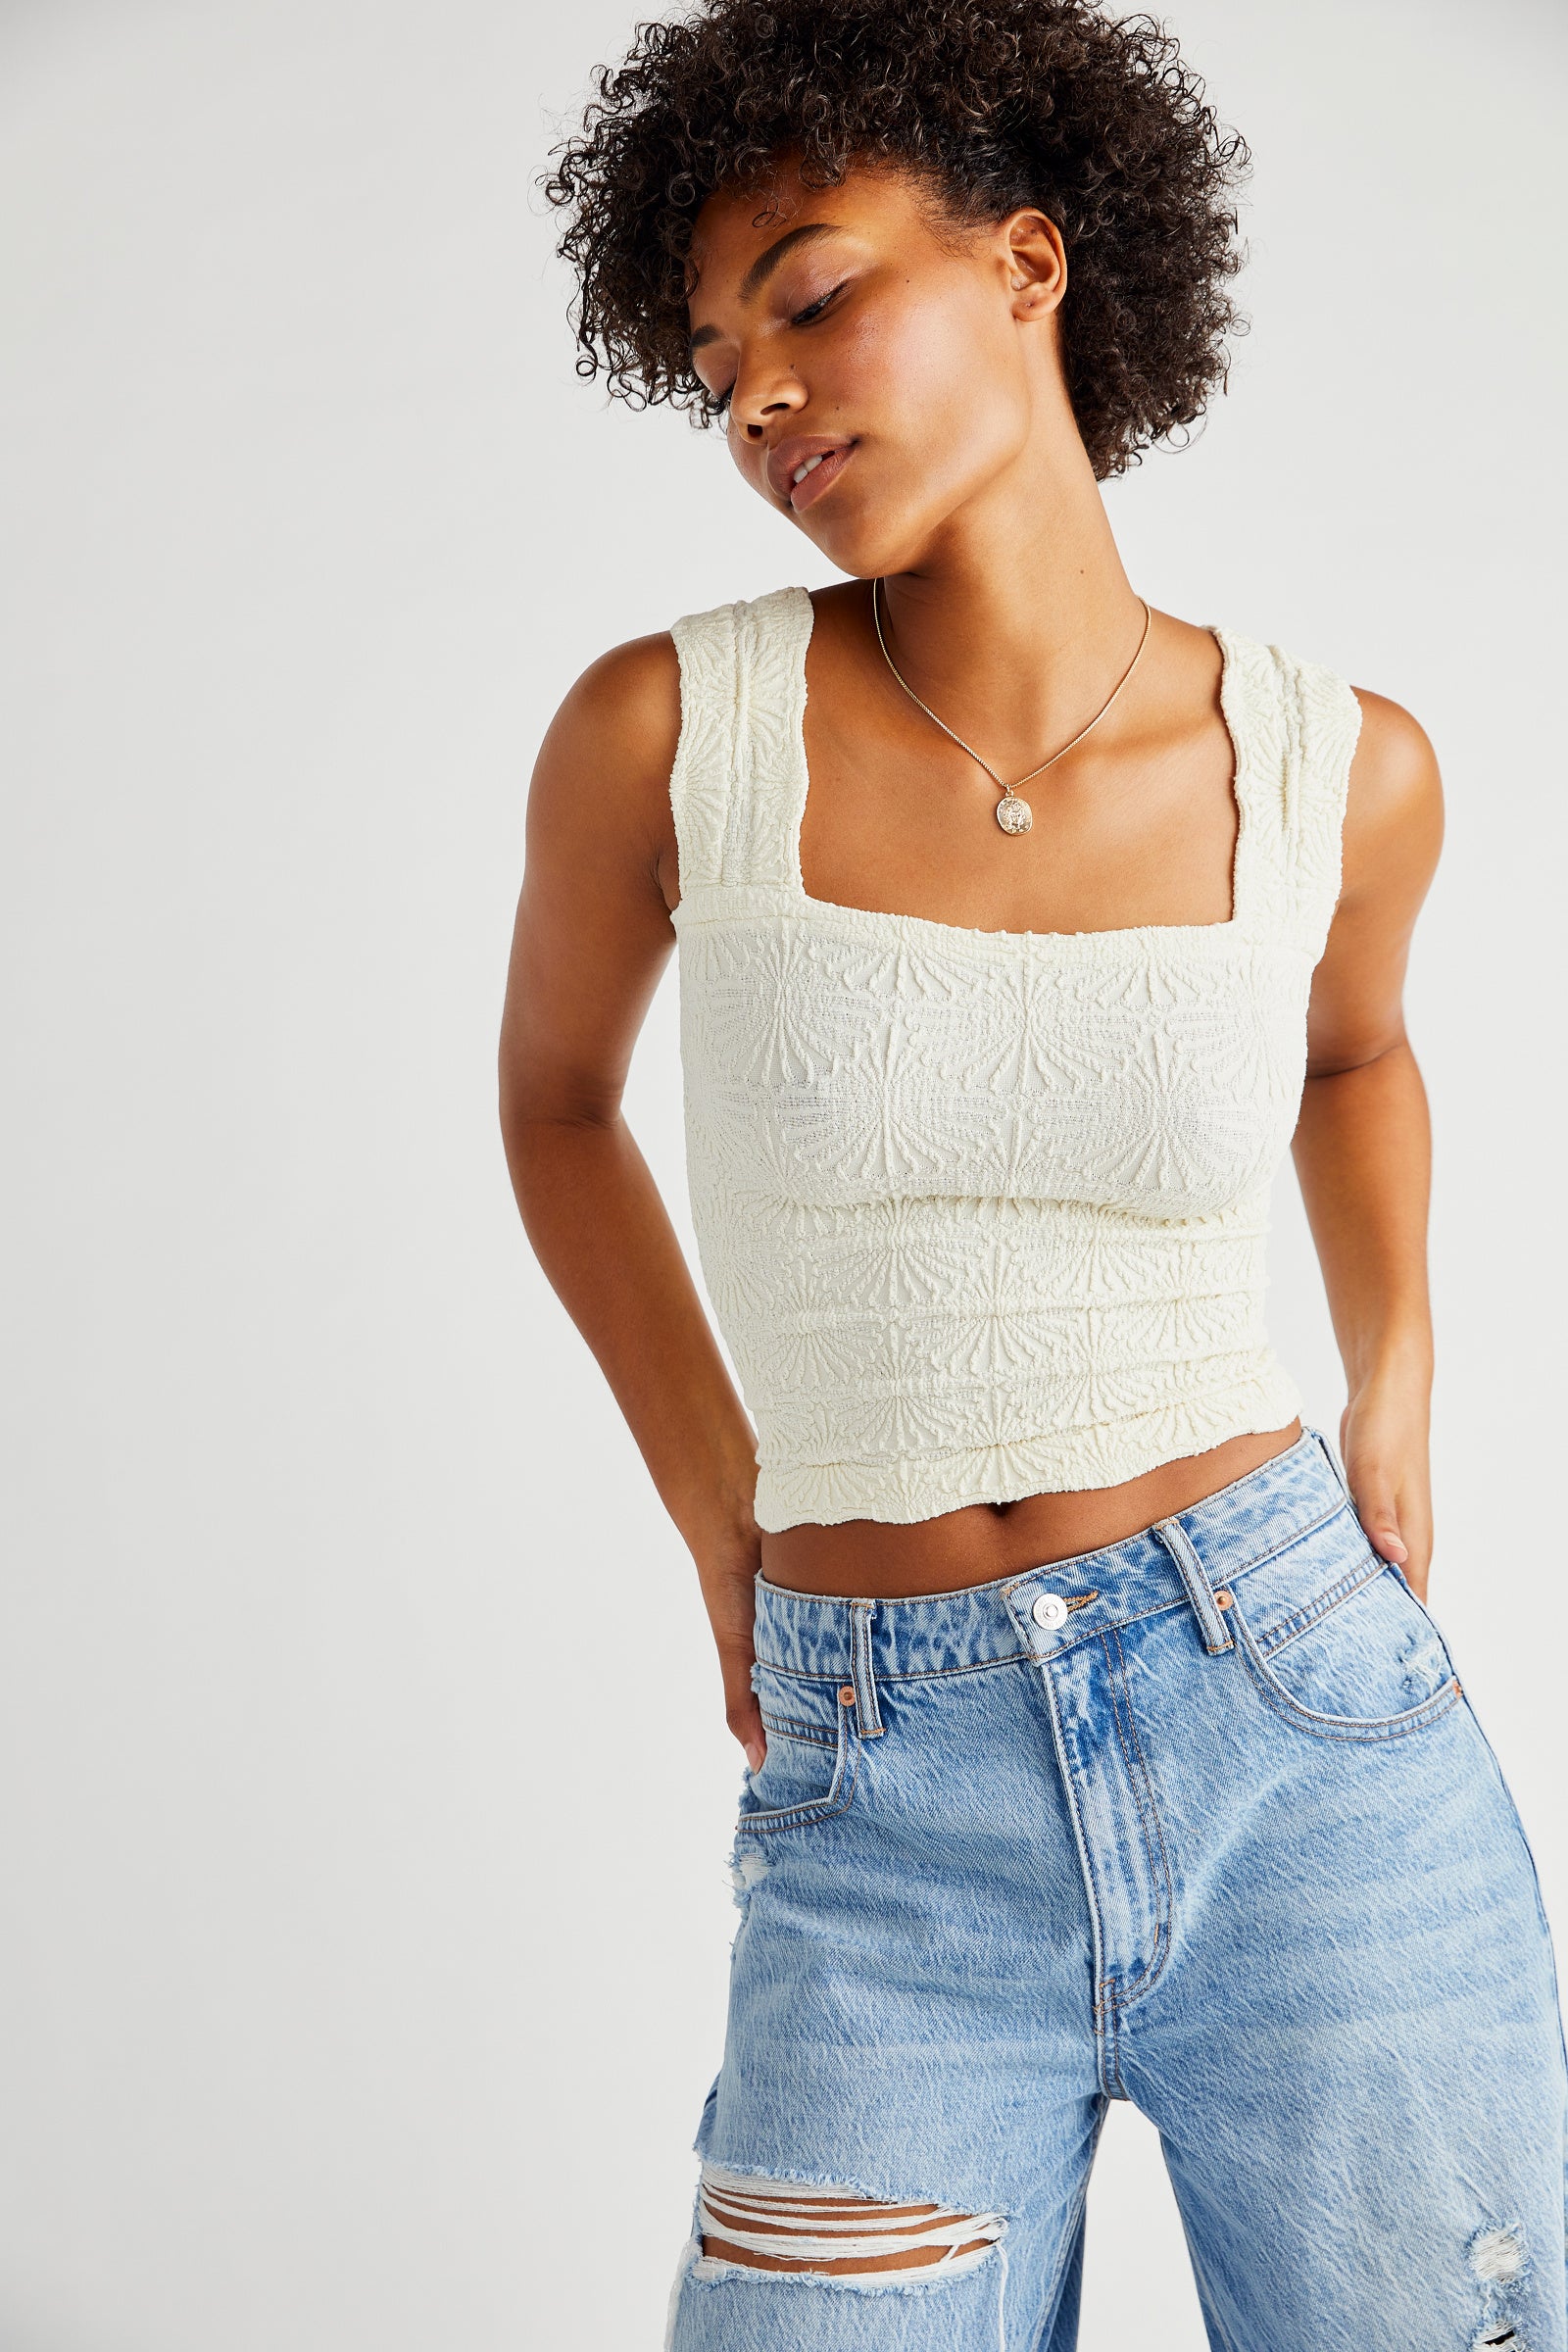 Romance Forever White Crochet Lace Crop Top